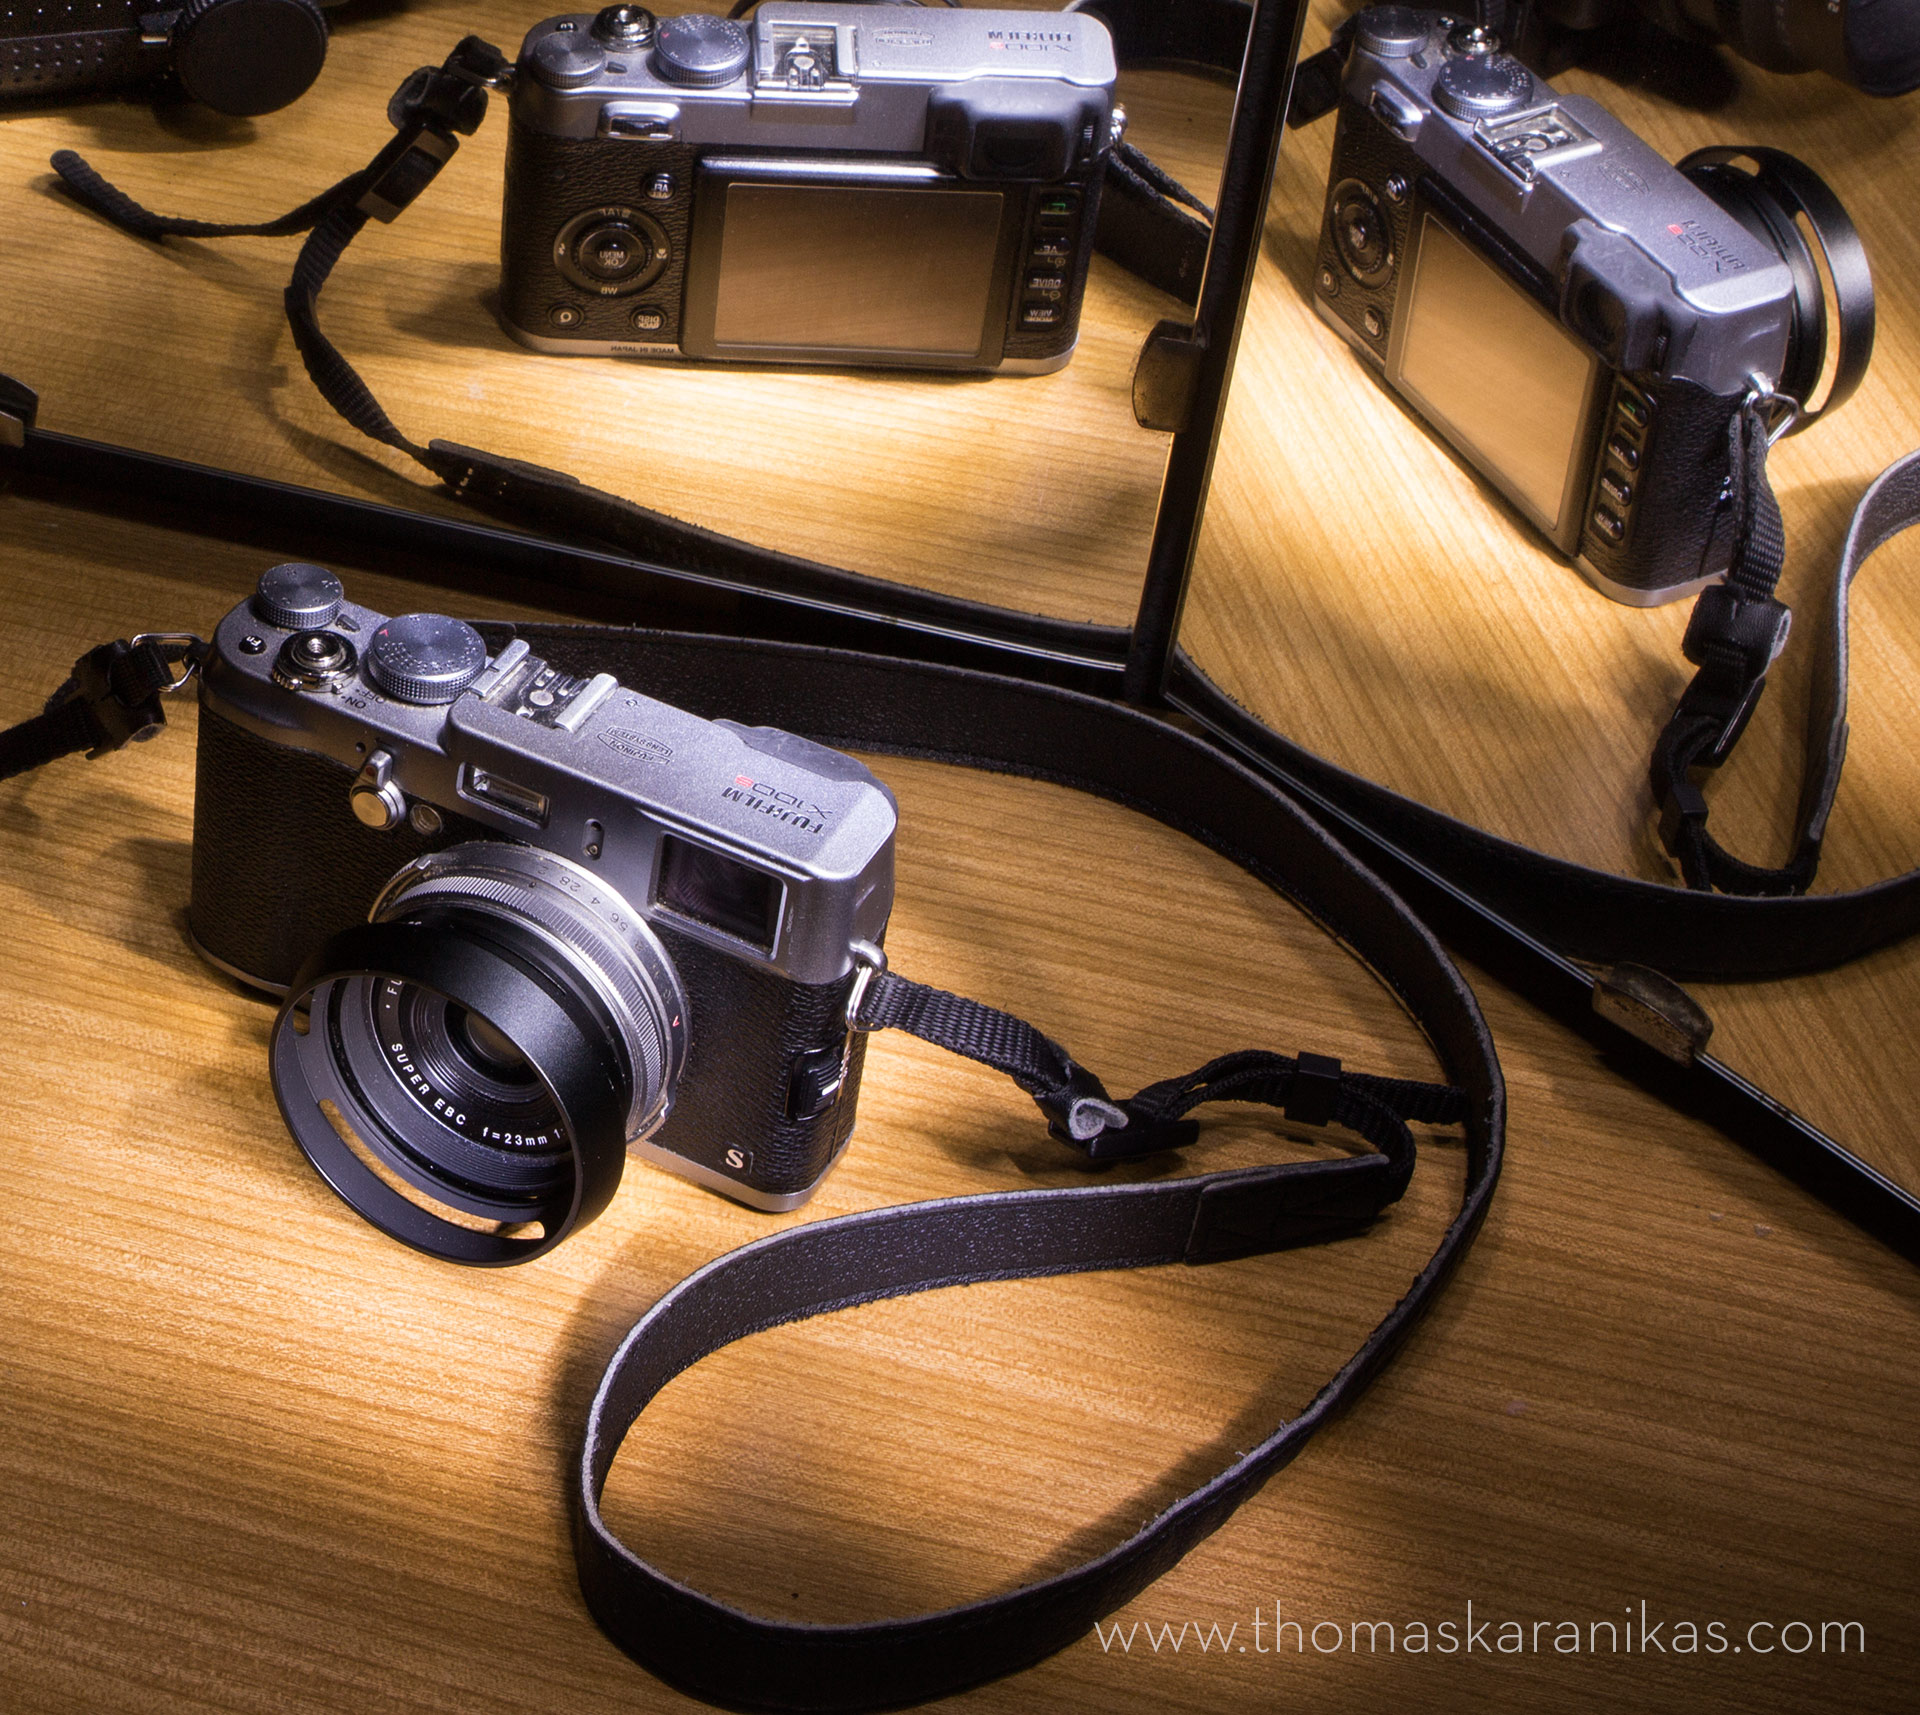 Why is everybody in a hurry for the new fujifilm models? GFX & X100F